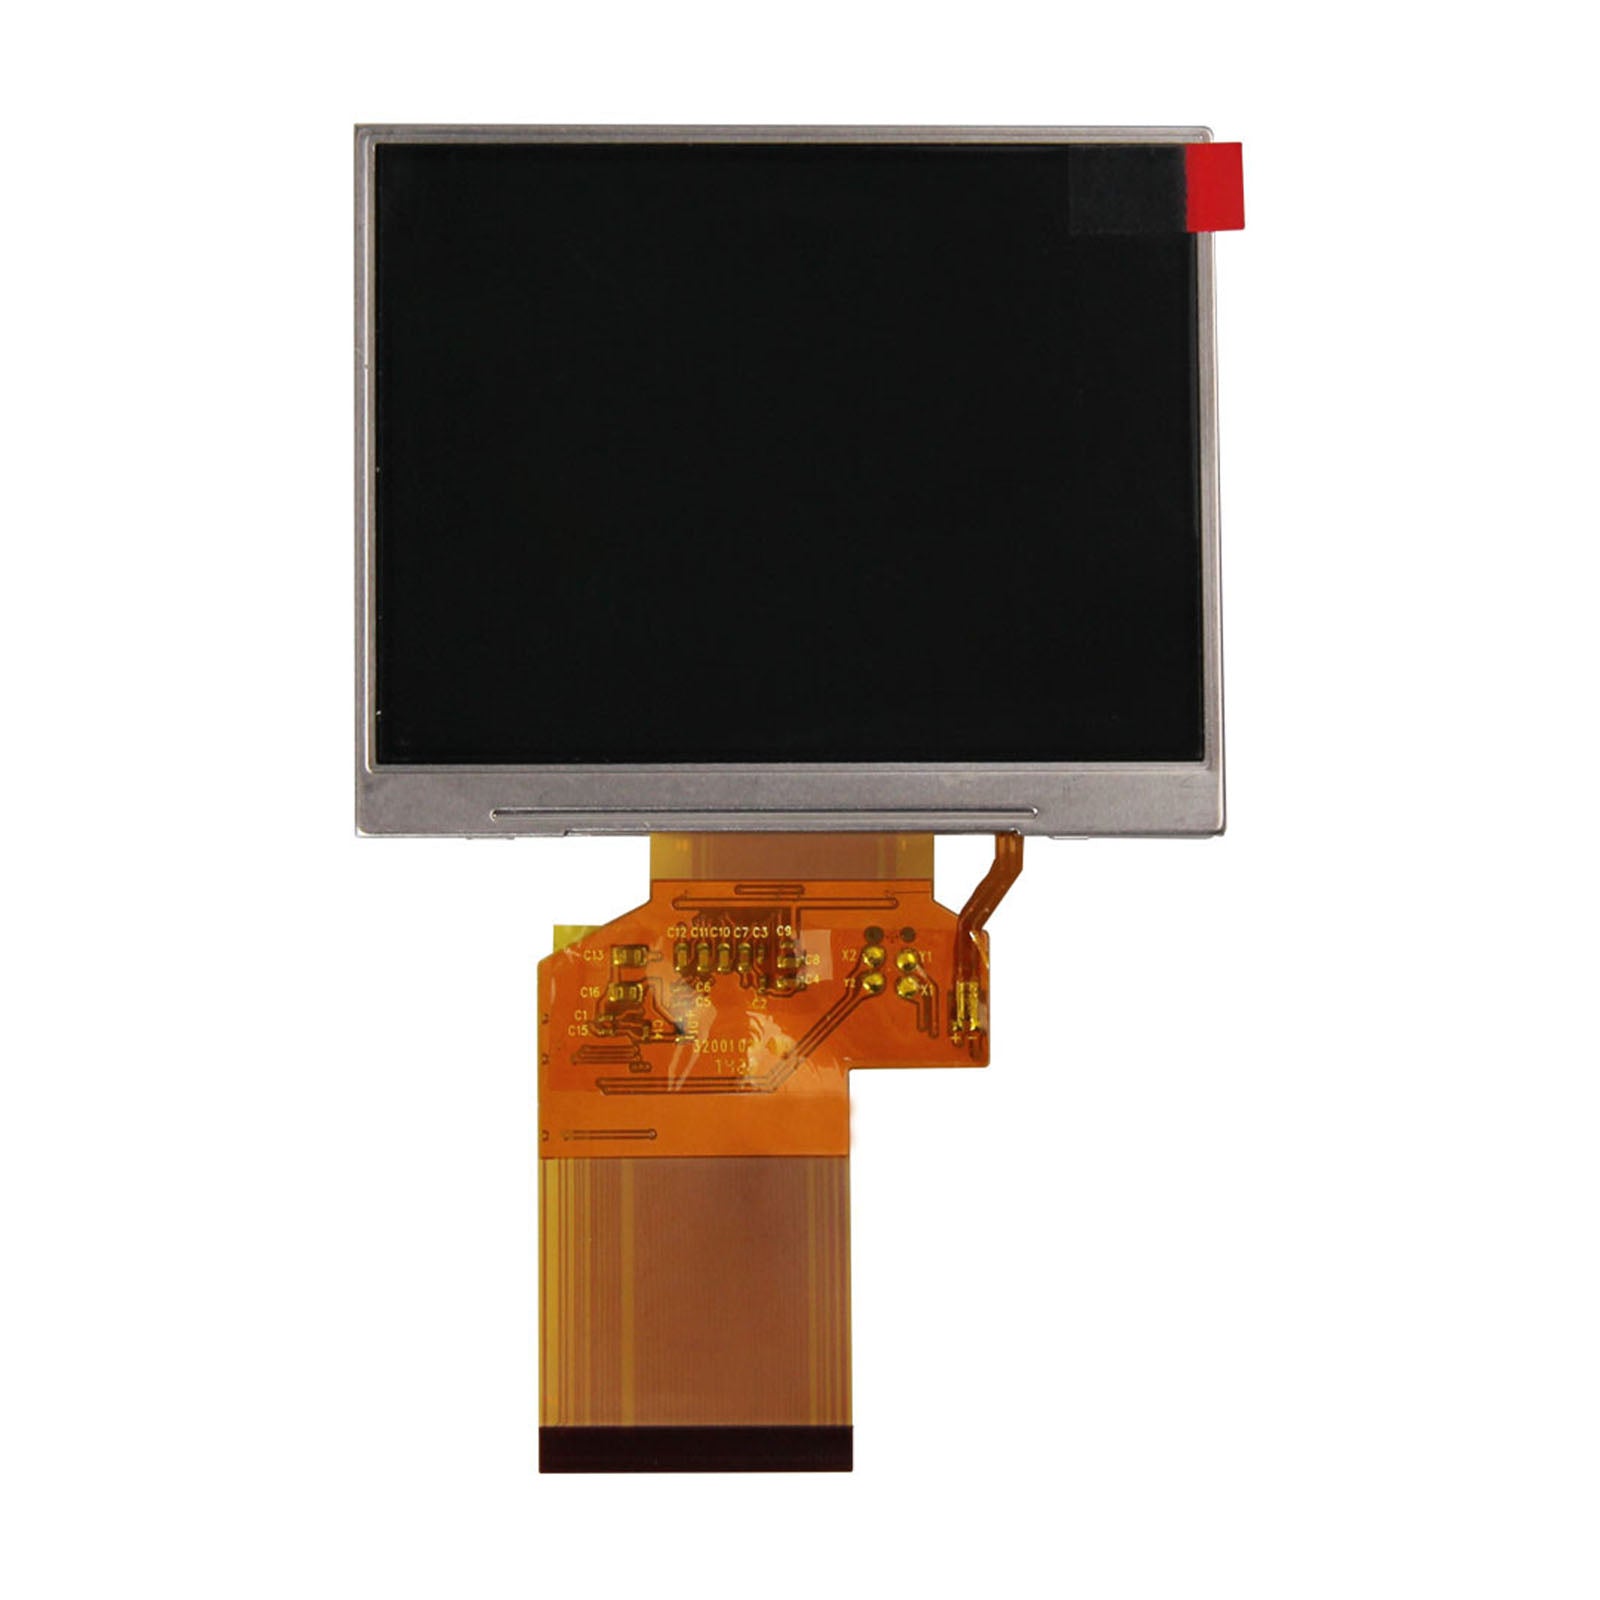 3.5-inch TFT display panel with a 320x240 resolution, using RGB interface